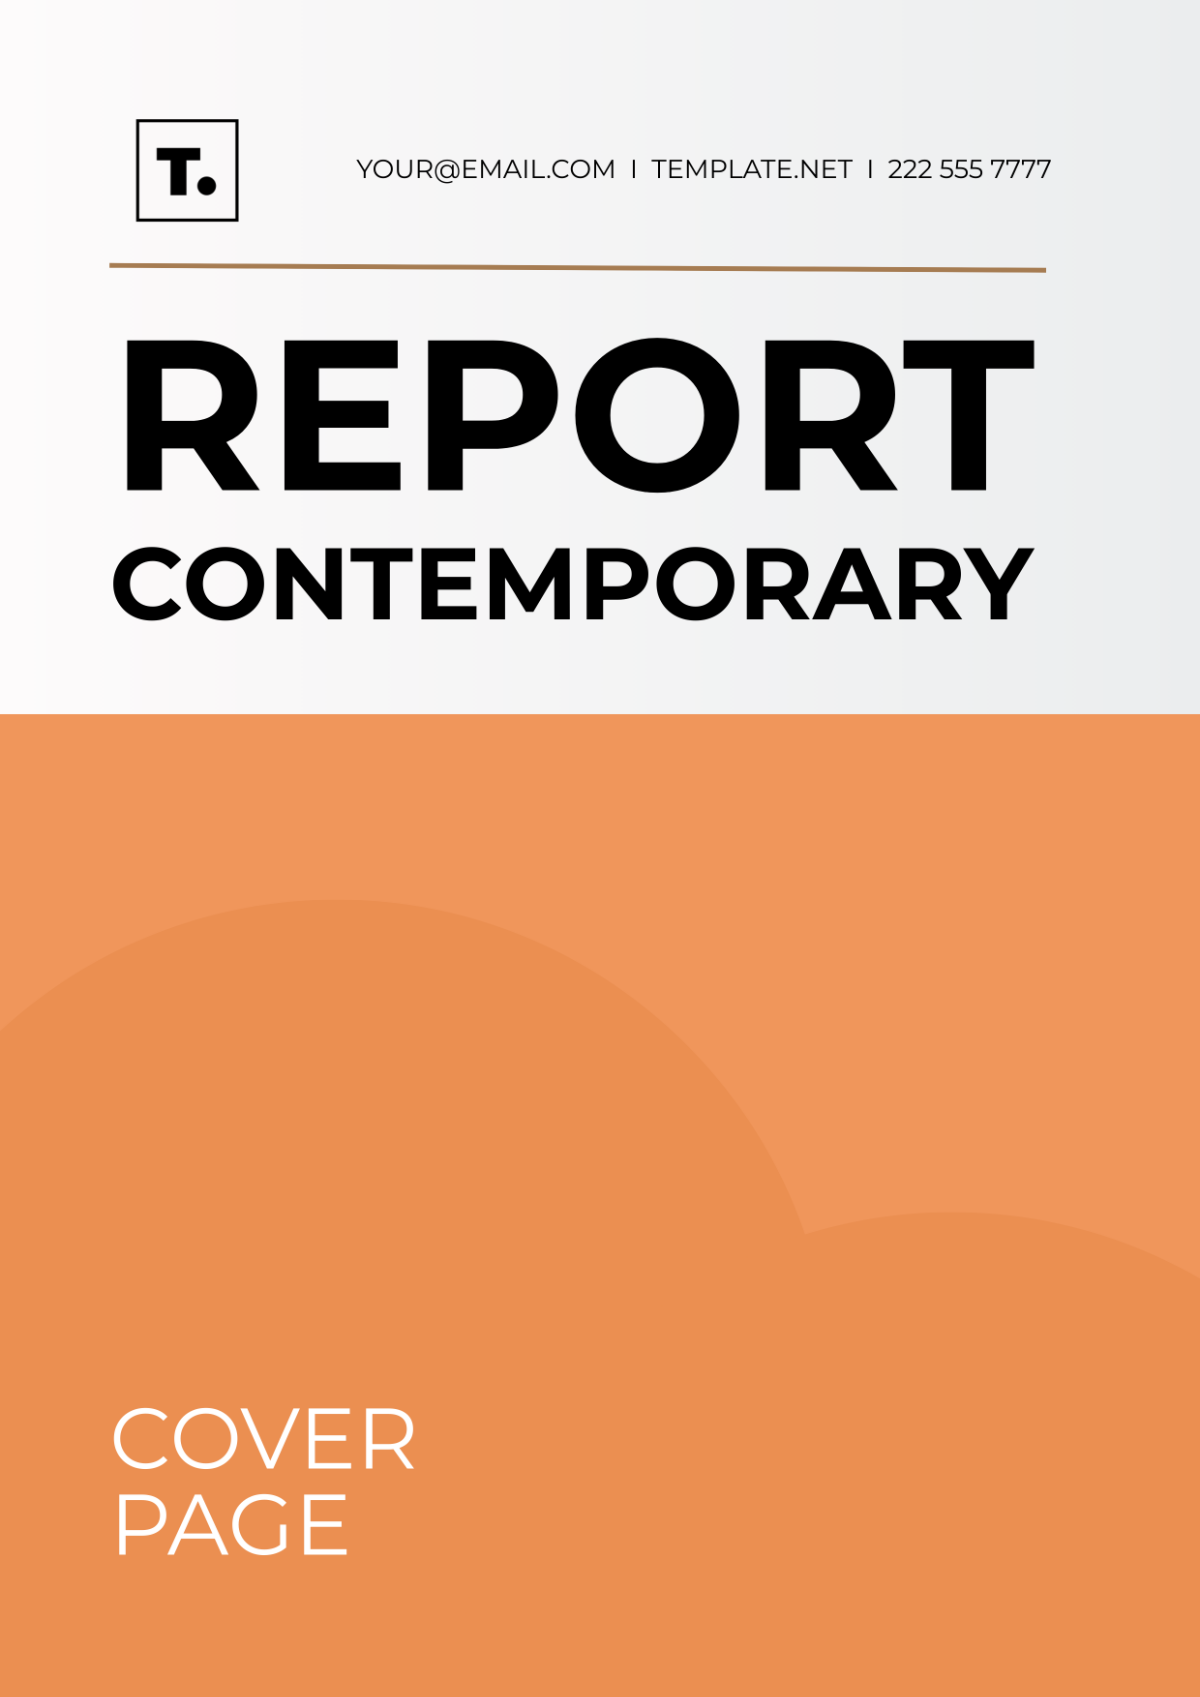 Report Contemporary Cover Page Template